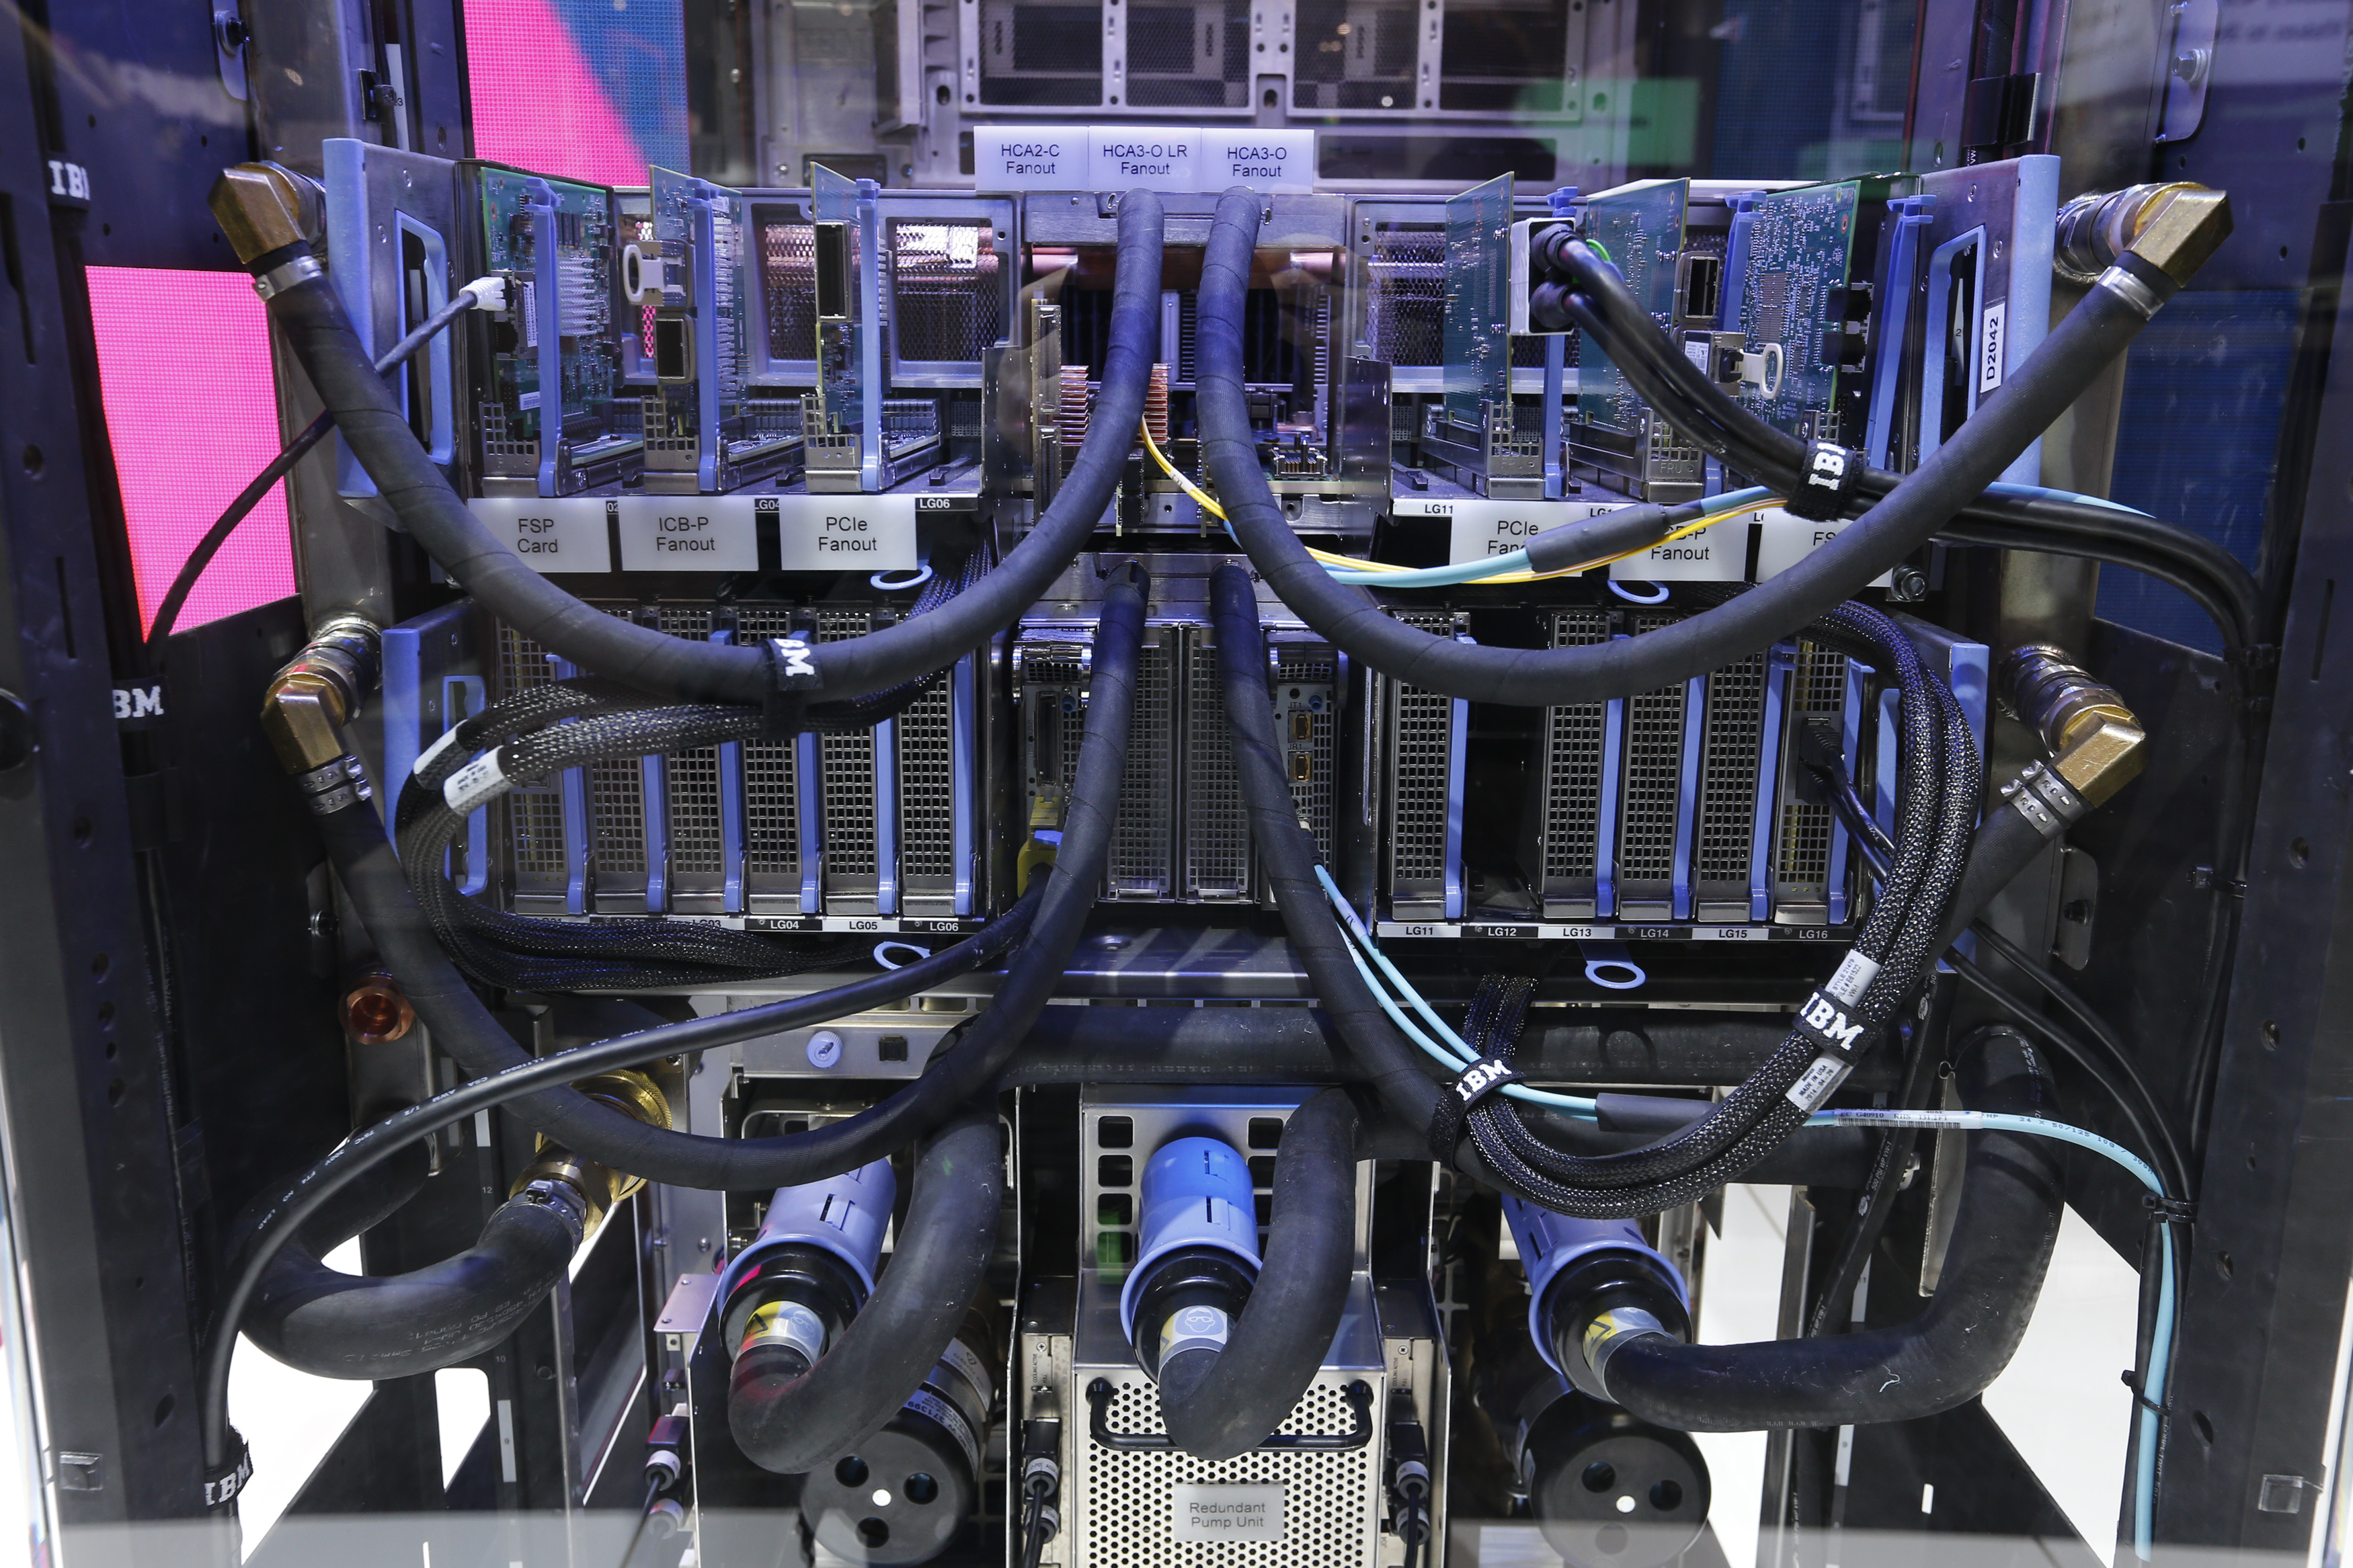 Picture shows the cooling system of an IBM z13 mainframe server on IBM stand at the CeBIT trade fair in Hanover